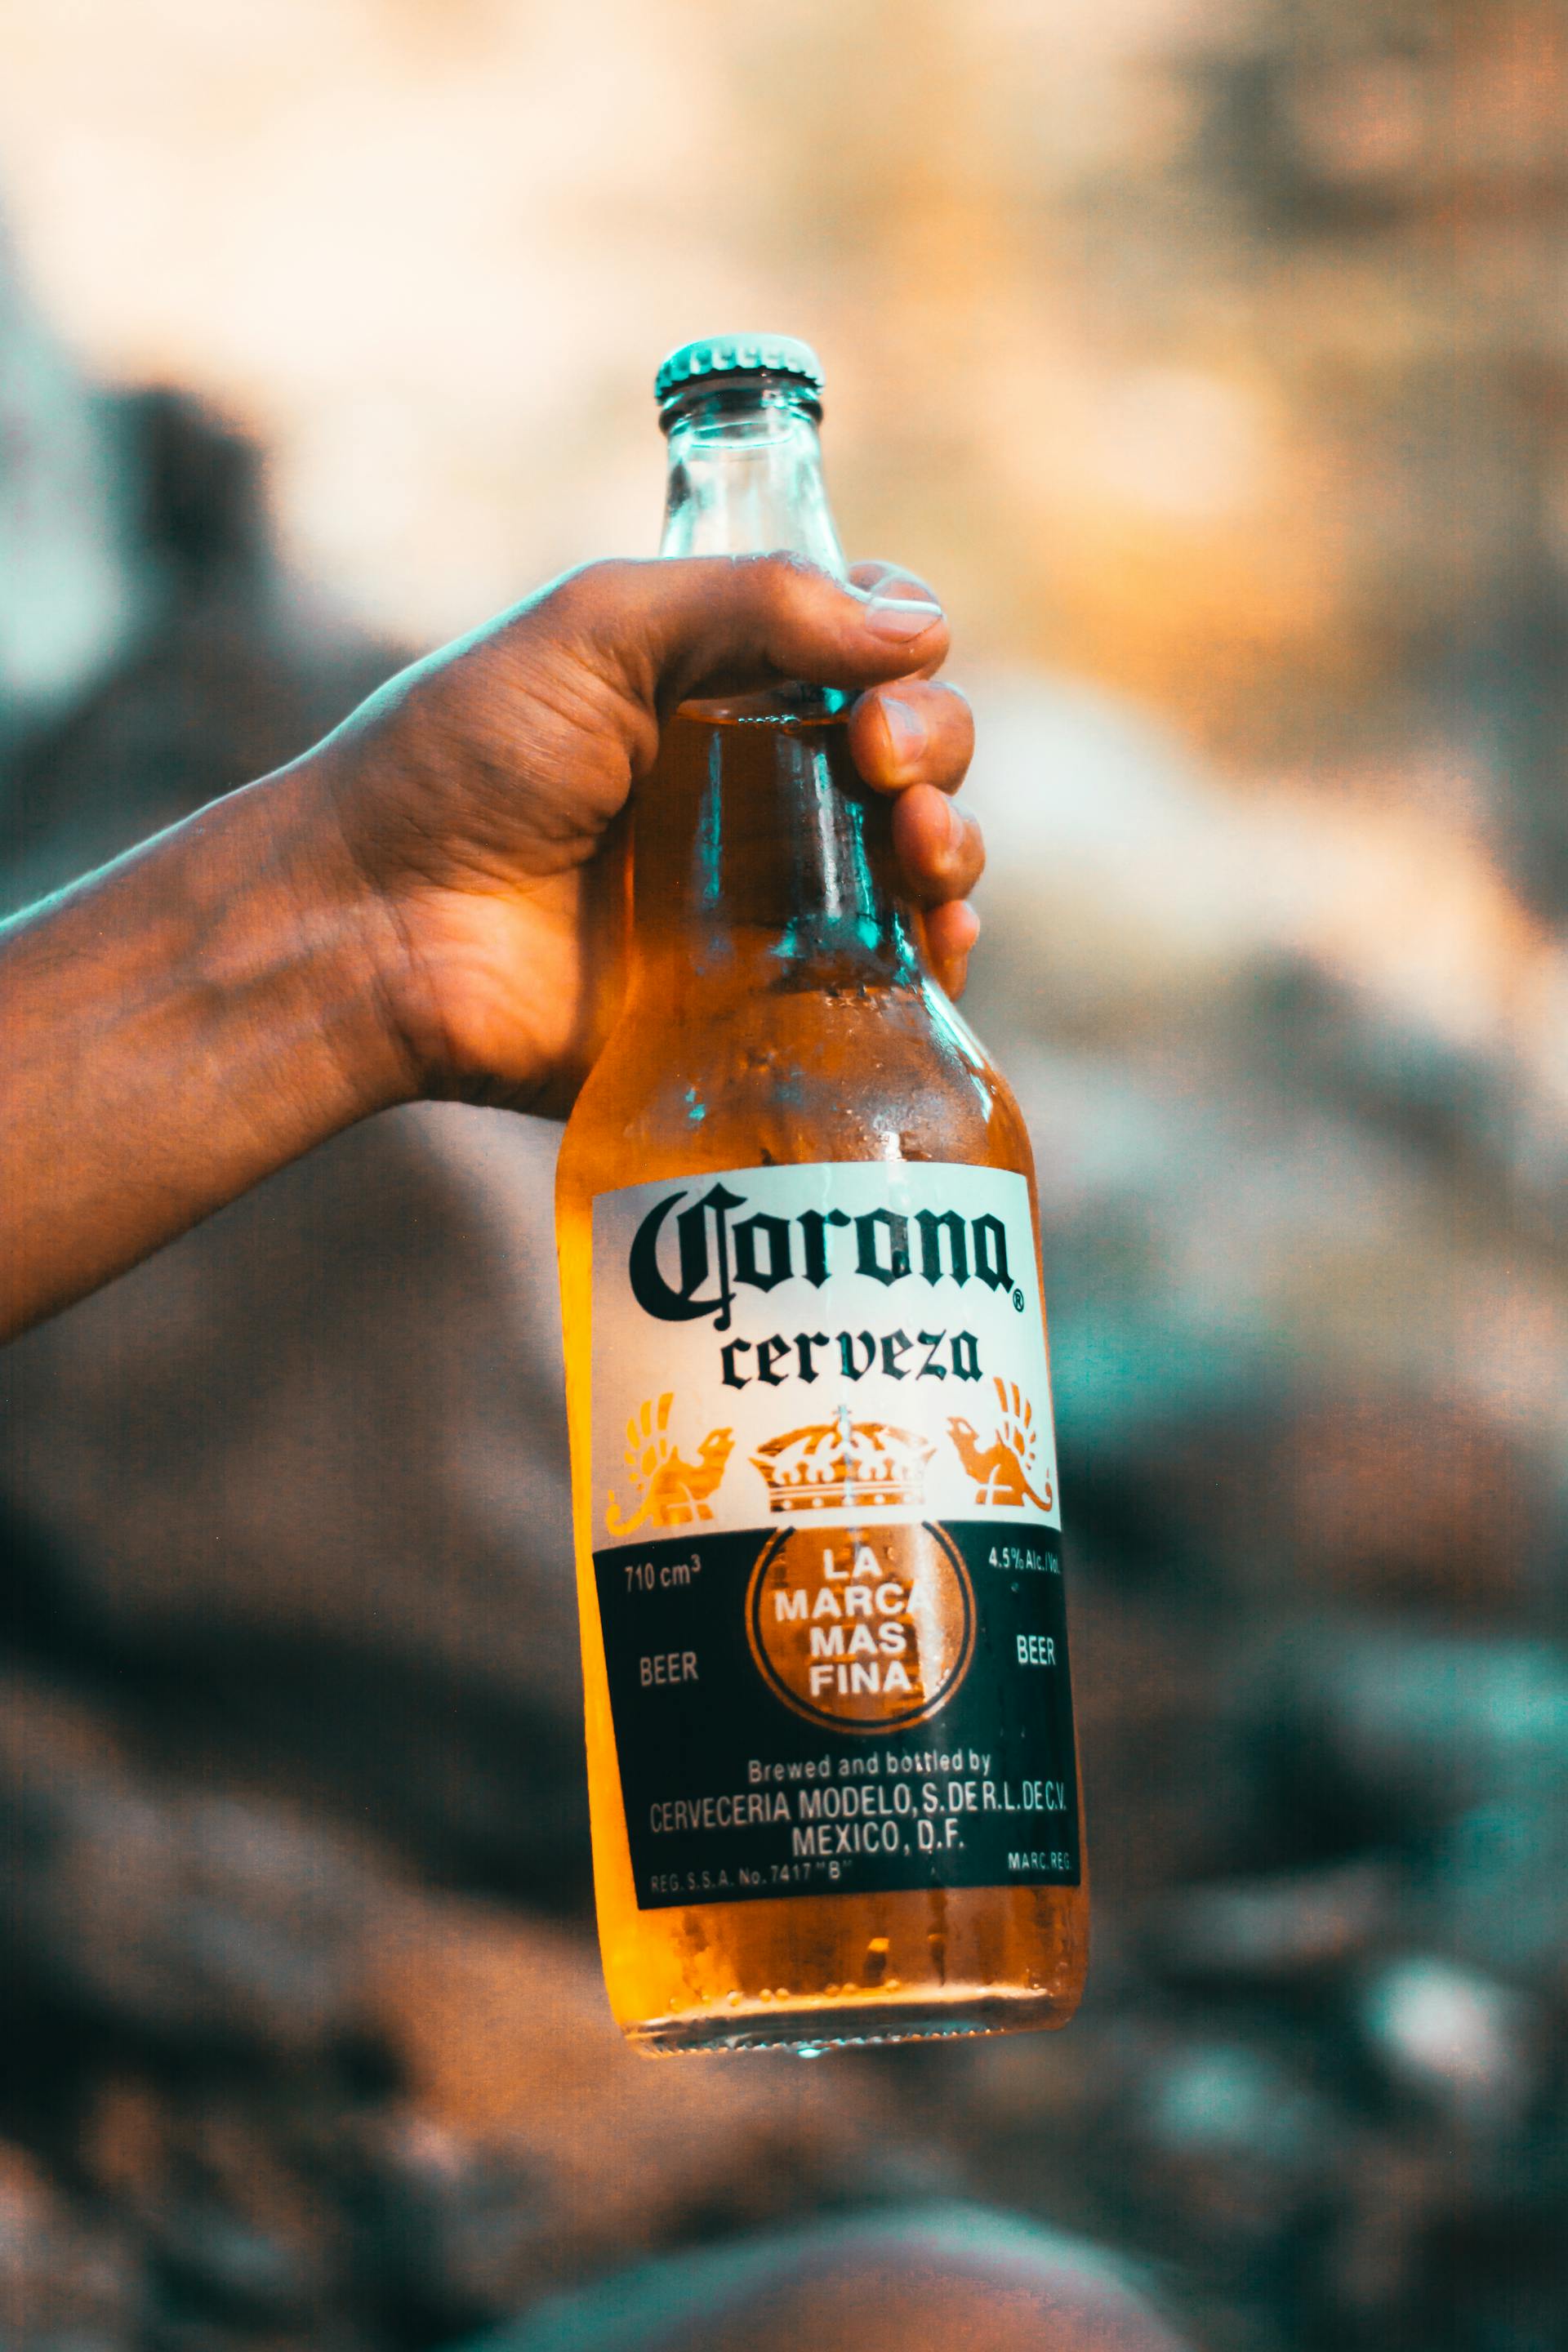 A person holding a beer bottle | Source: Pexels